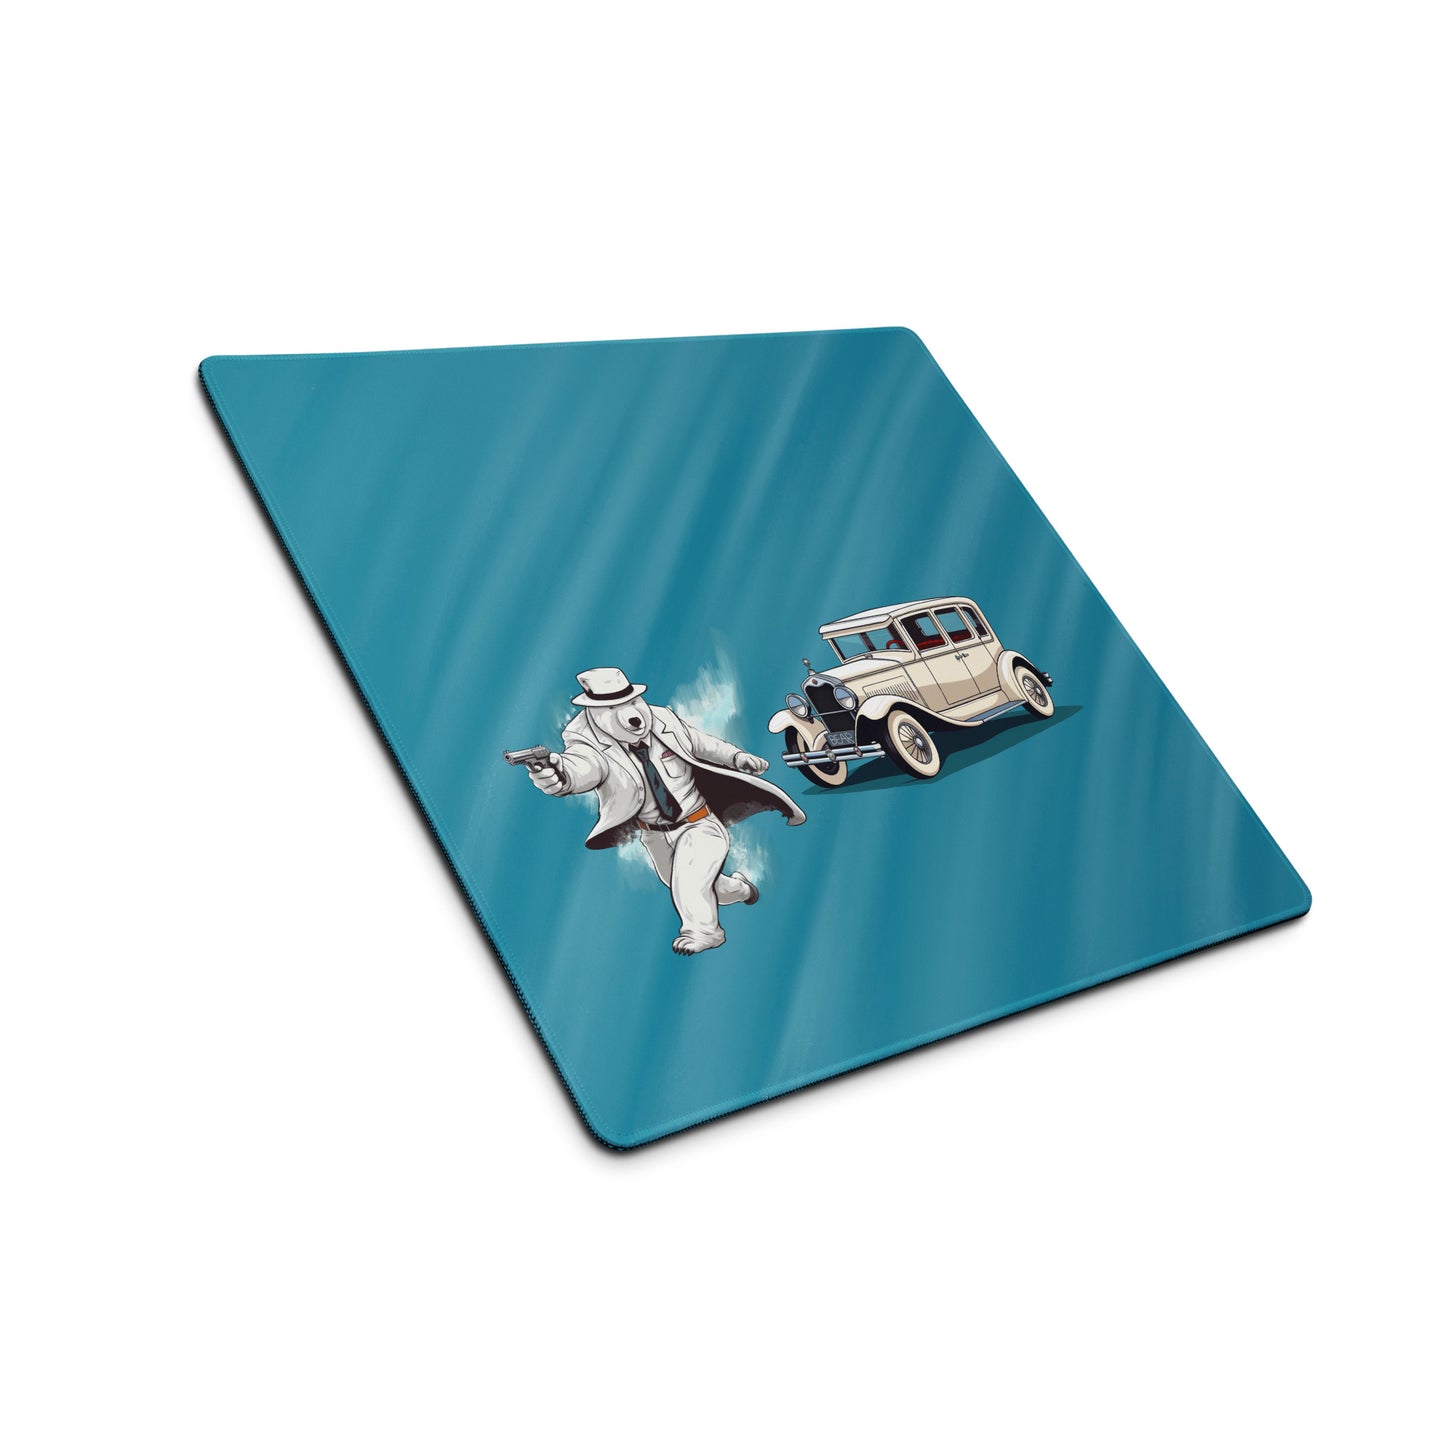 18" x 16" desk pad with a gangster polar bear and his car shown at an angle. Blue in color.